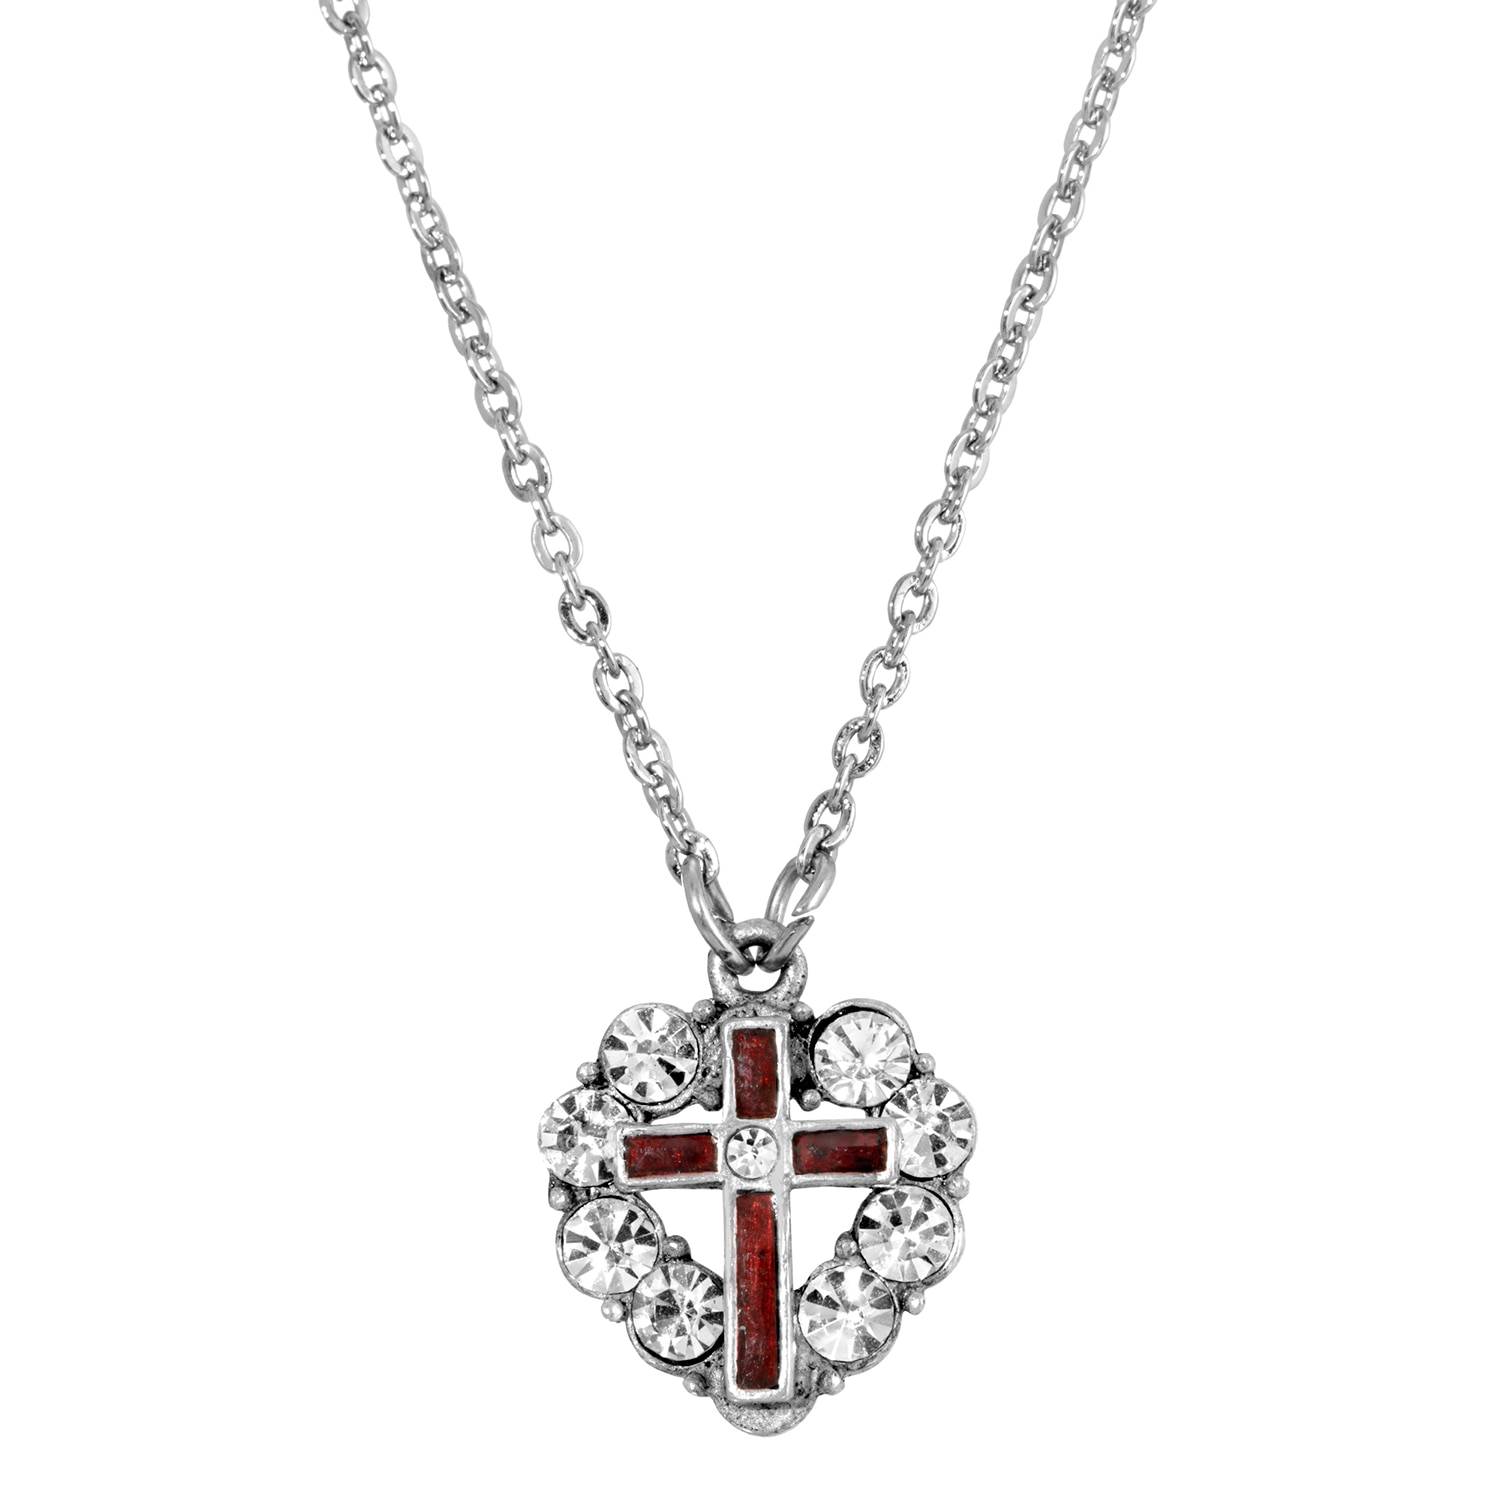 1928 Symbols of Faith Pewter red enamel crystal heart necklace 16-19 inch adjustable chain